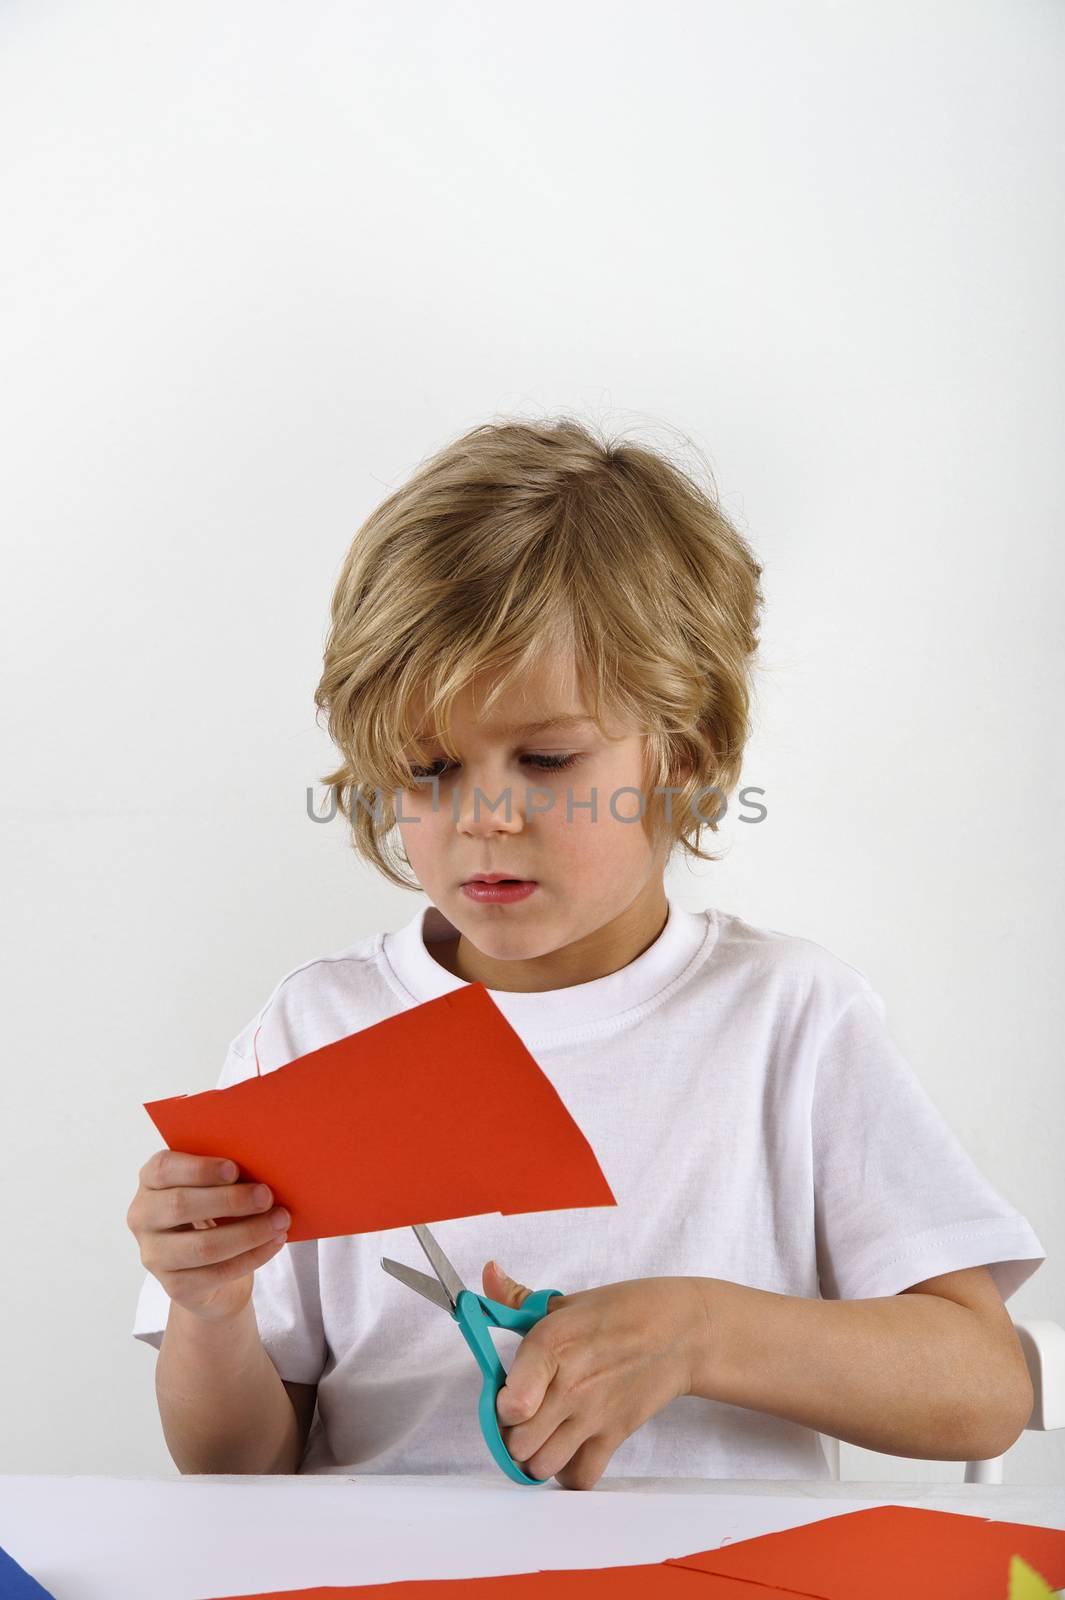 young boy cuts red colored paper with a scissors